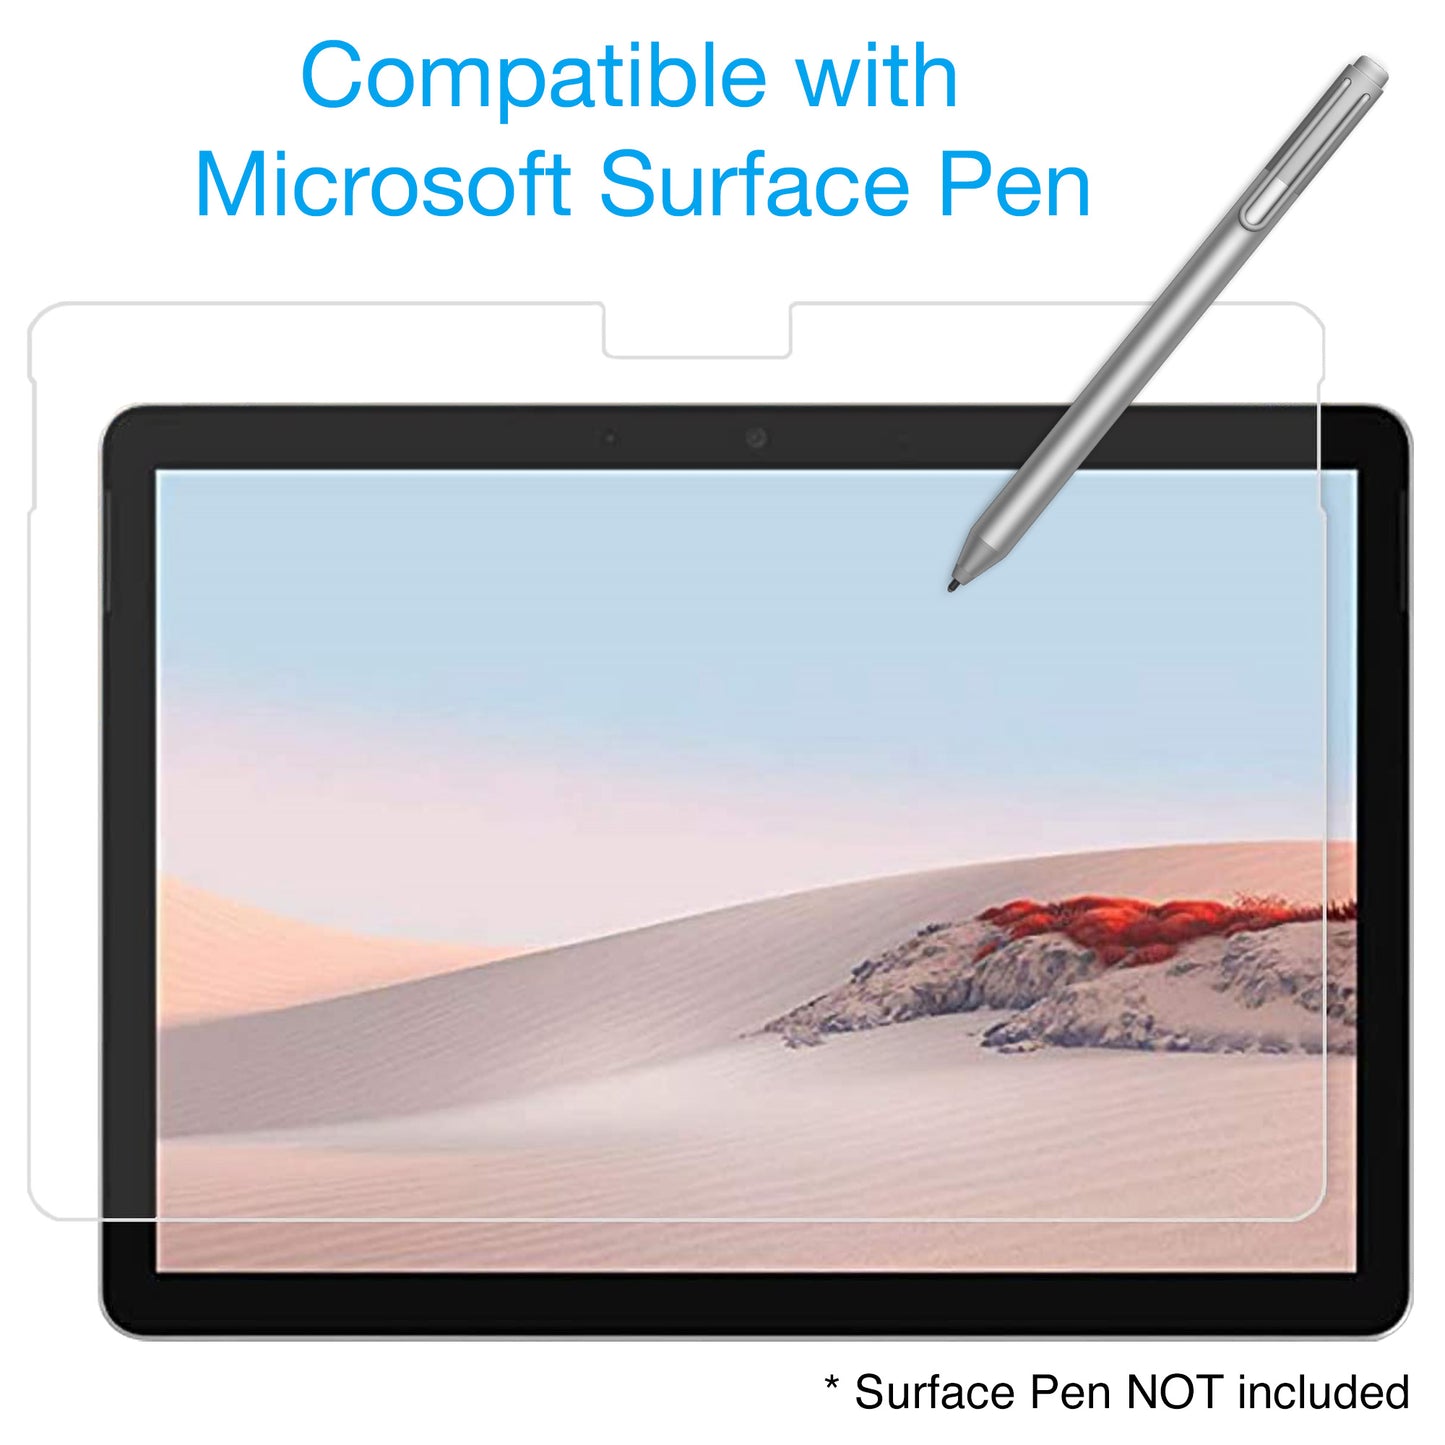 [3 Pack] MEZON Microsoft Surface Go 2 (10.5") Ultra Clear Film Screen Protector – Case and Surface Pen Friendly